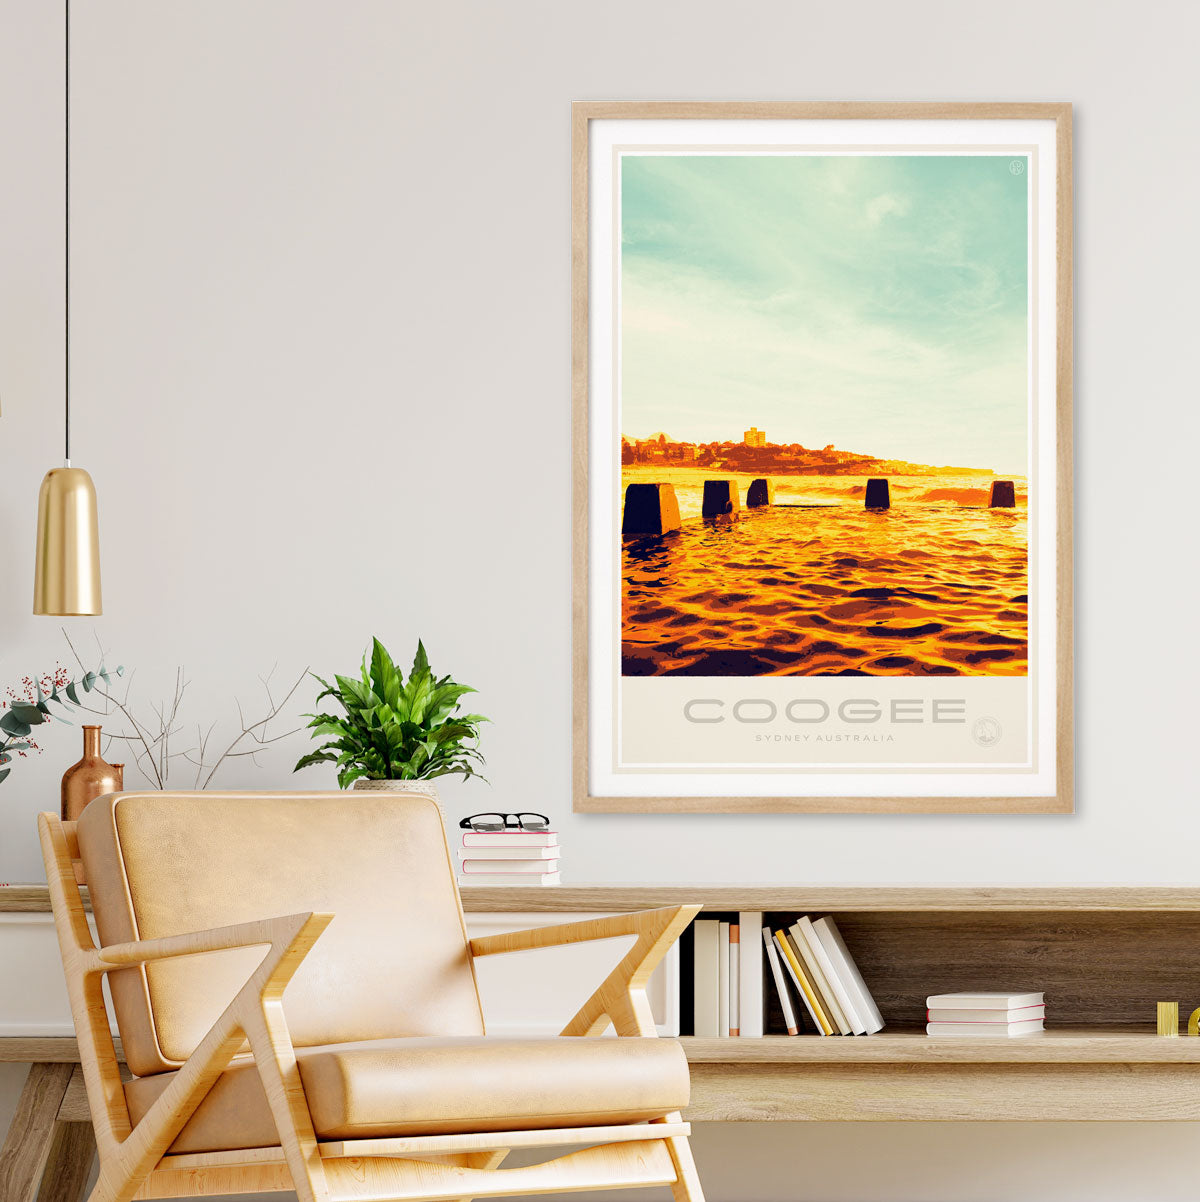 Coogee Pool Sydney vintage travel style print by places we luv